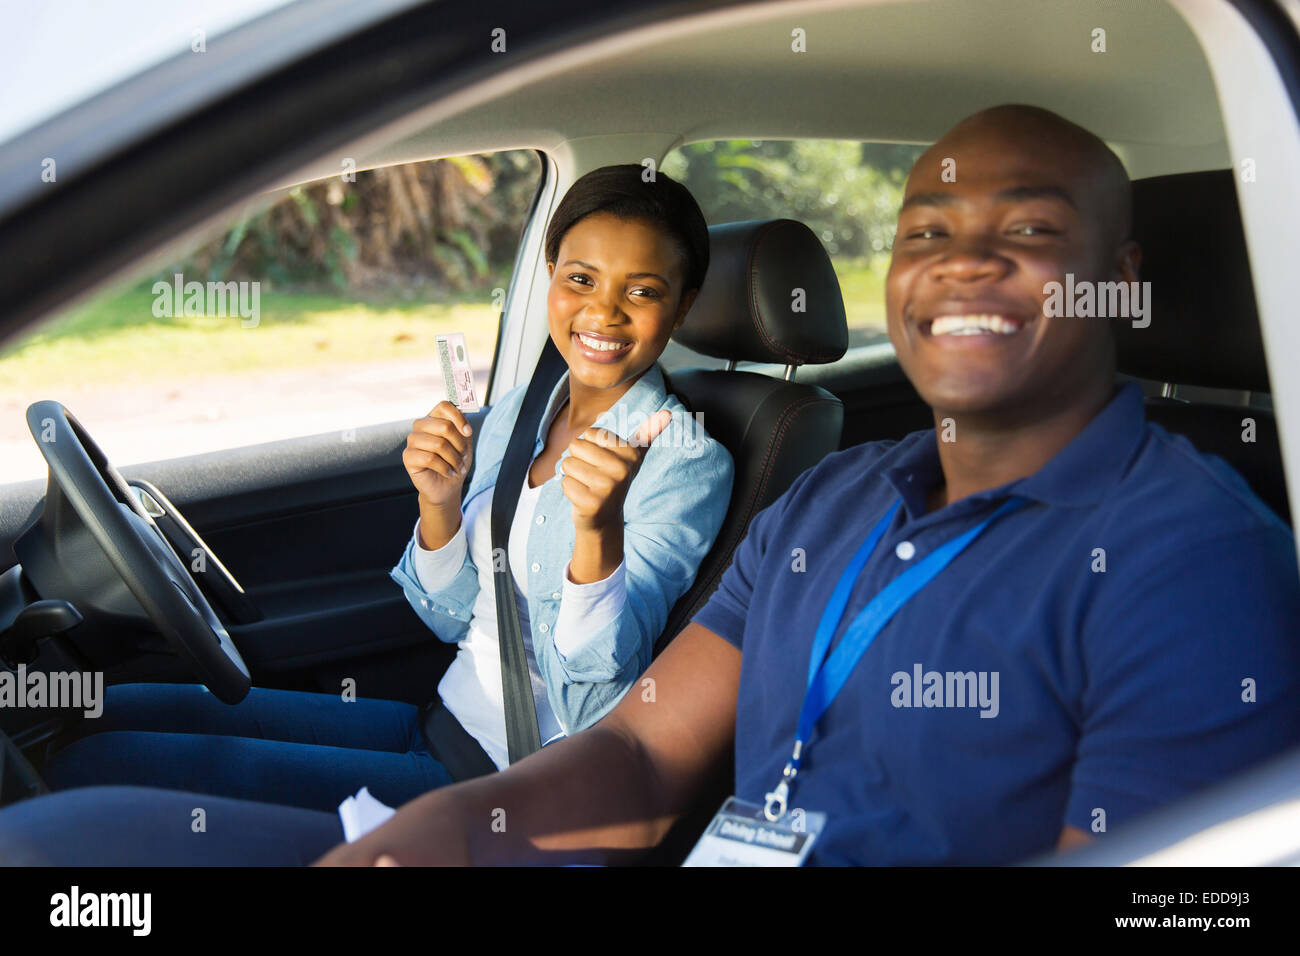 African woman has passed her driving test, holding driver's license Stock Photo